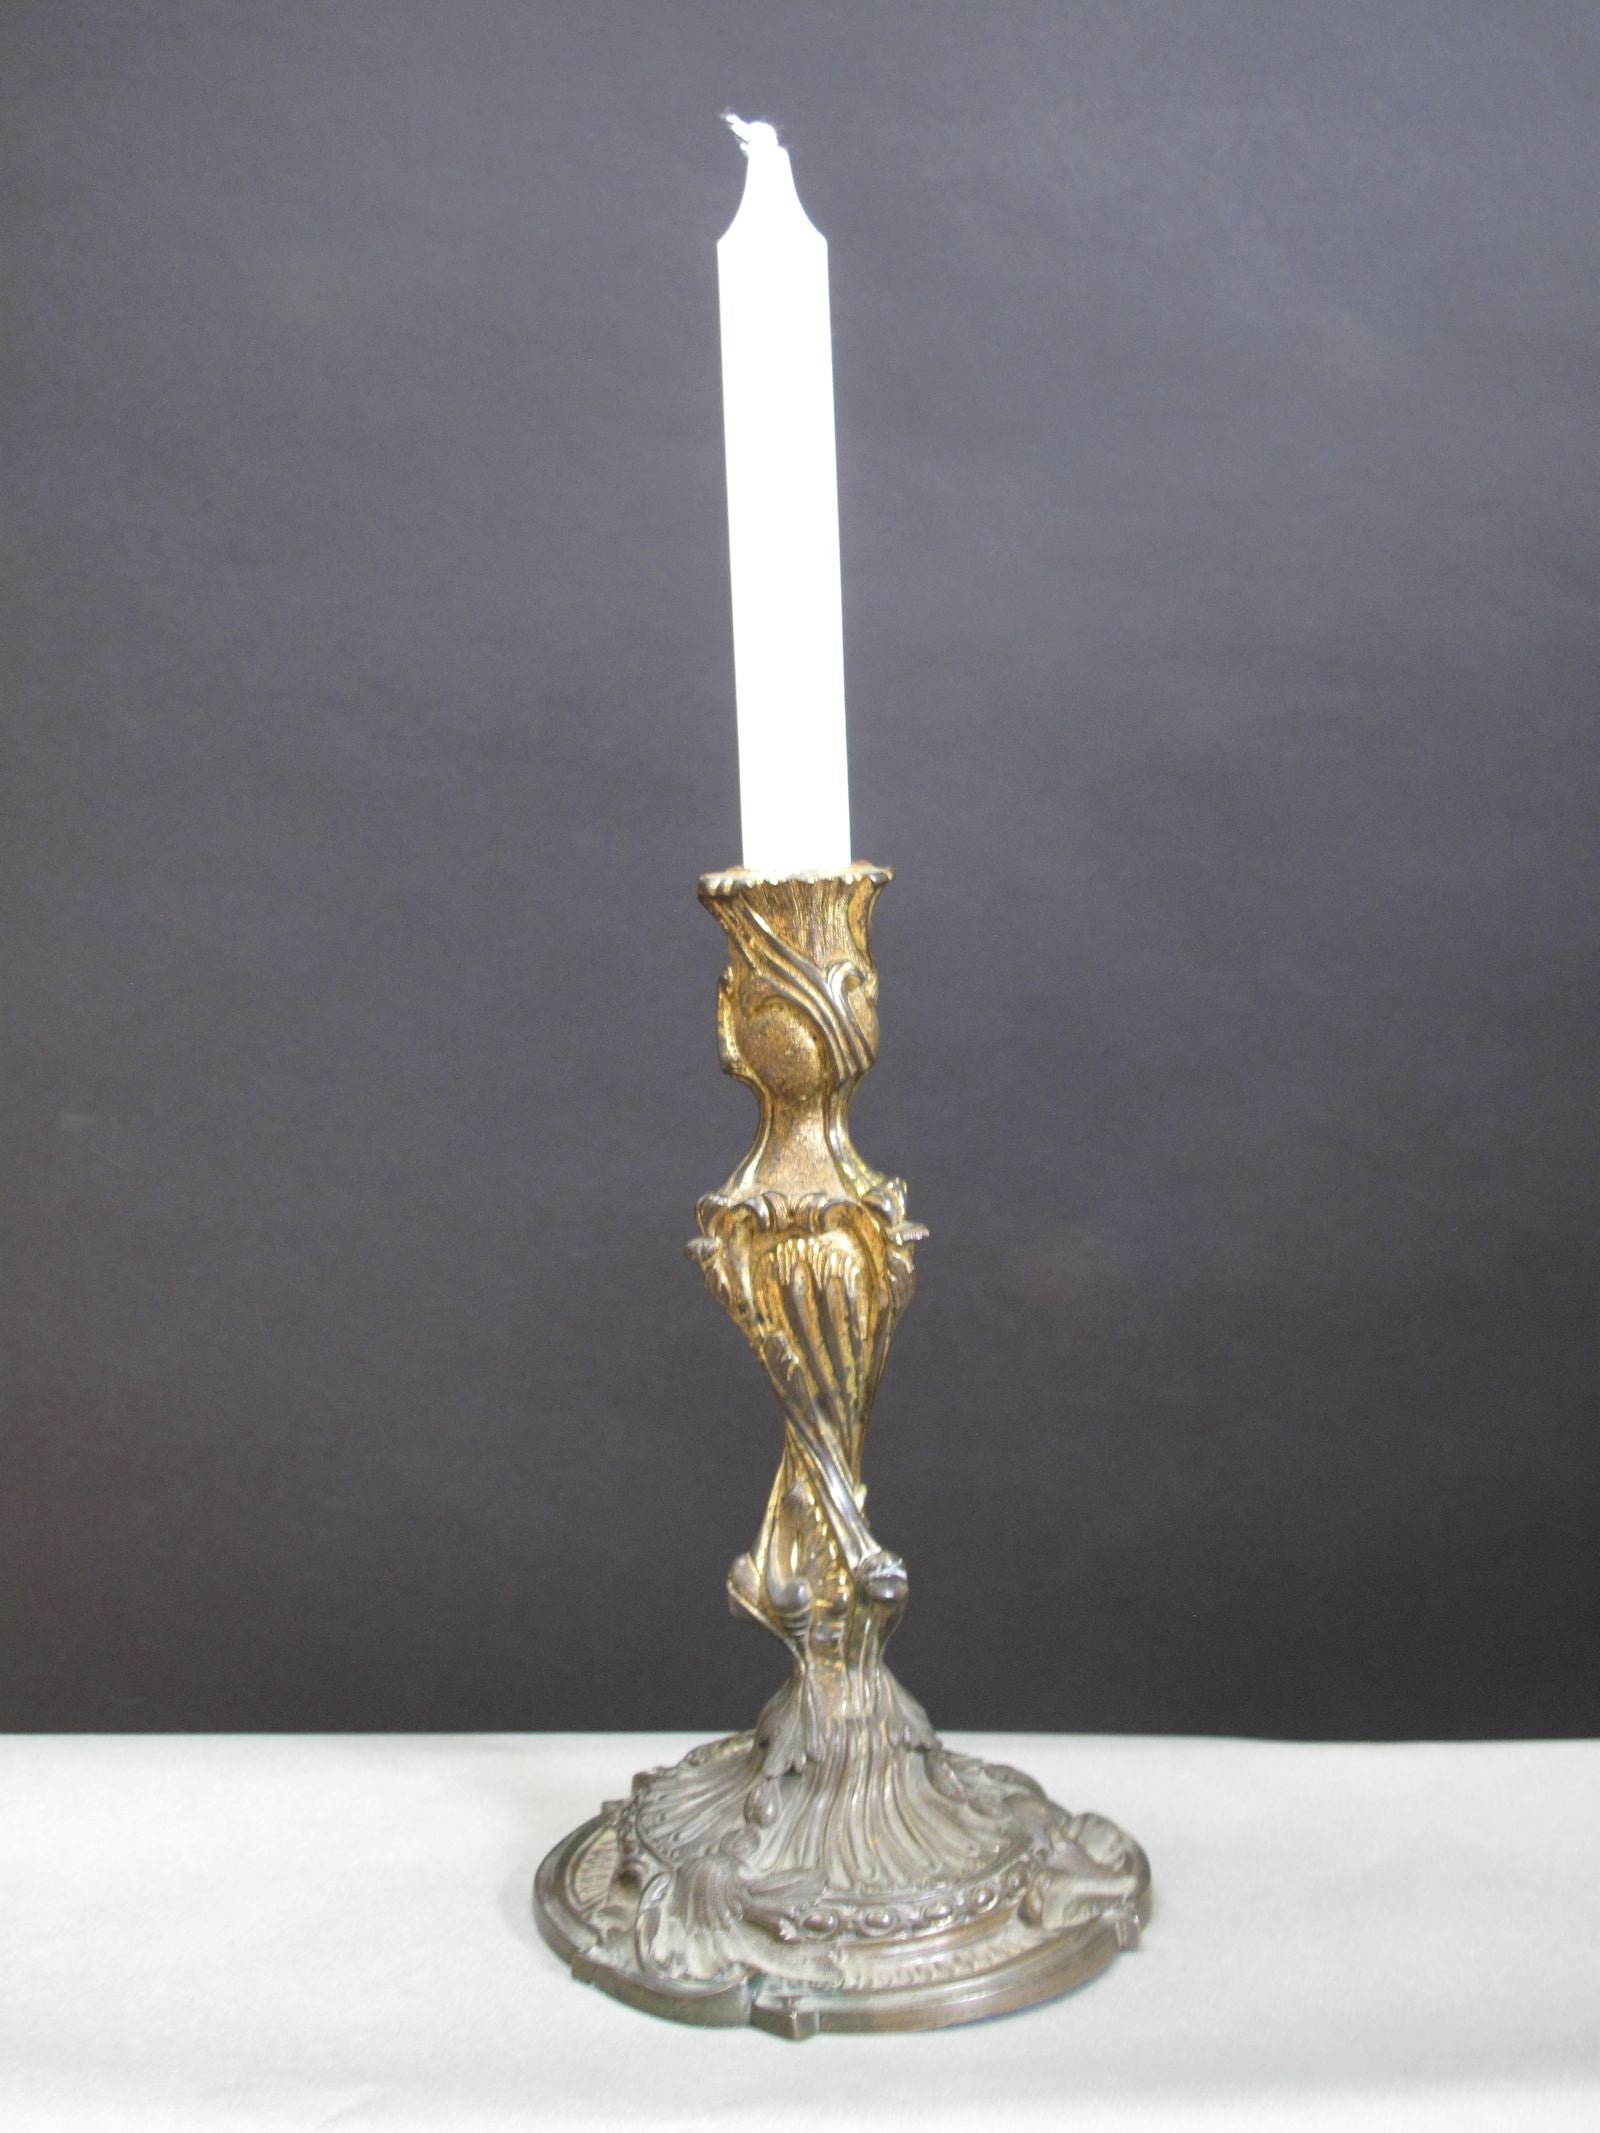 view of candlestick candle placed